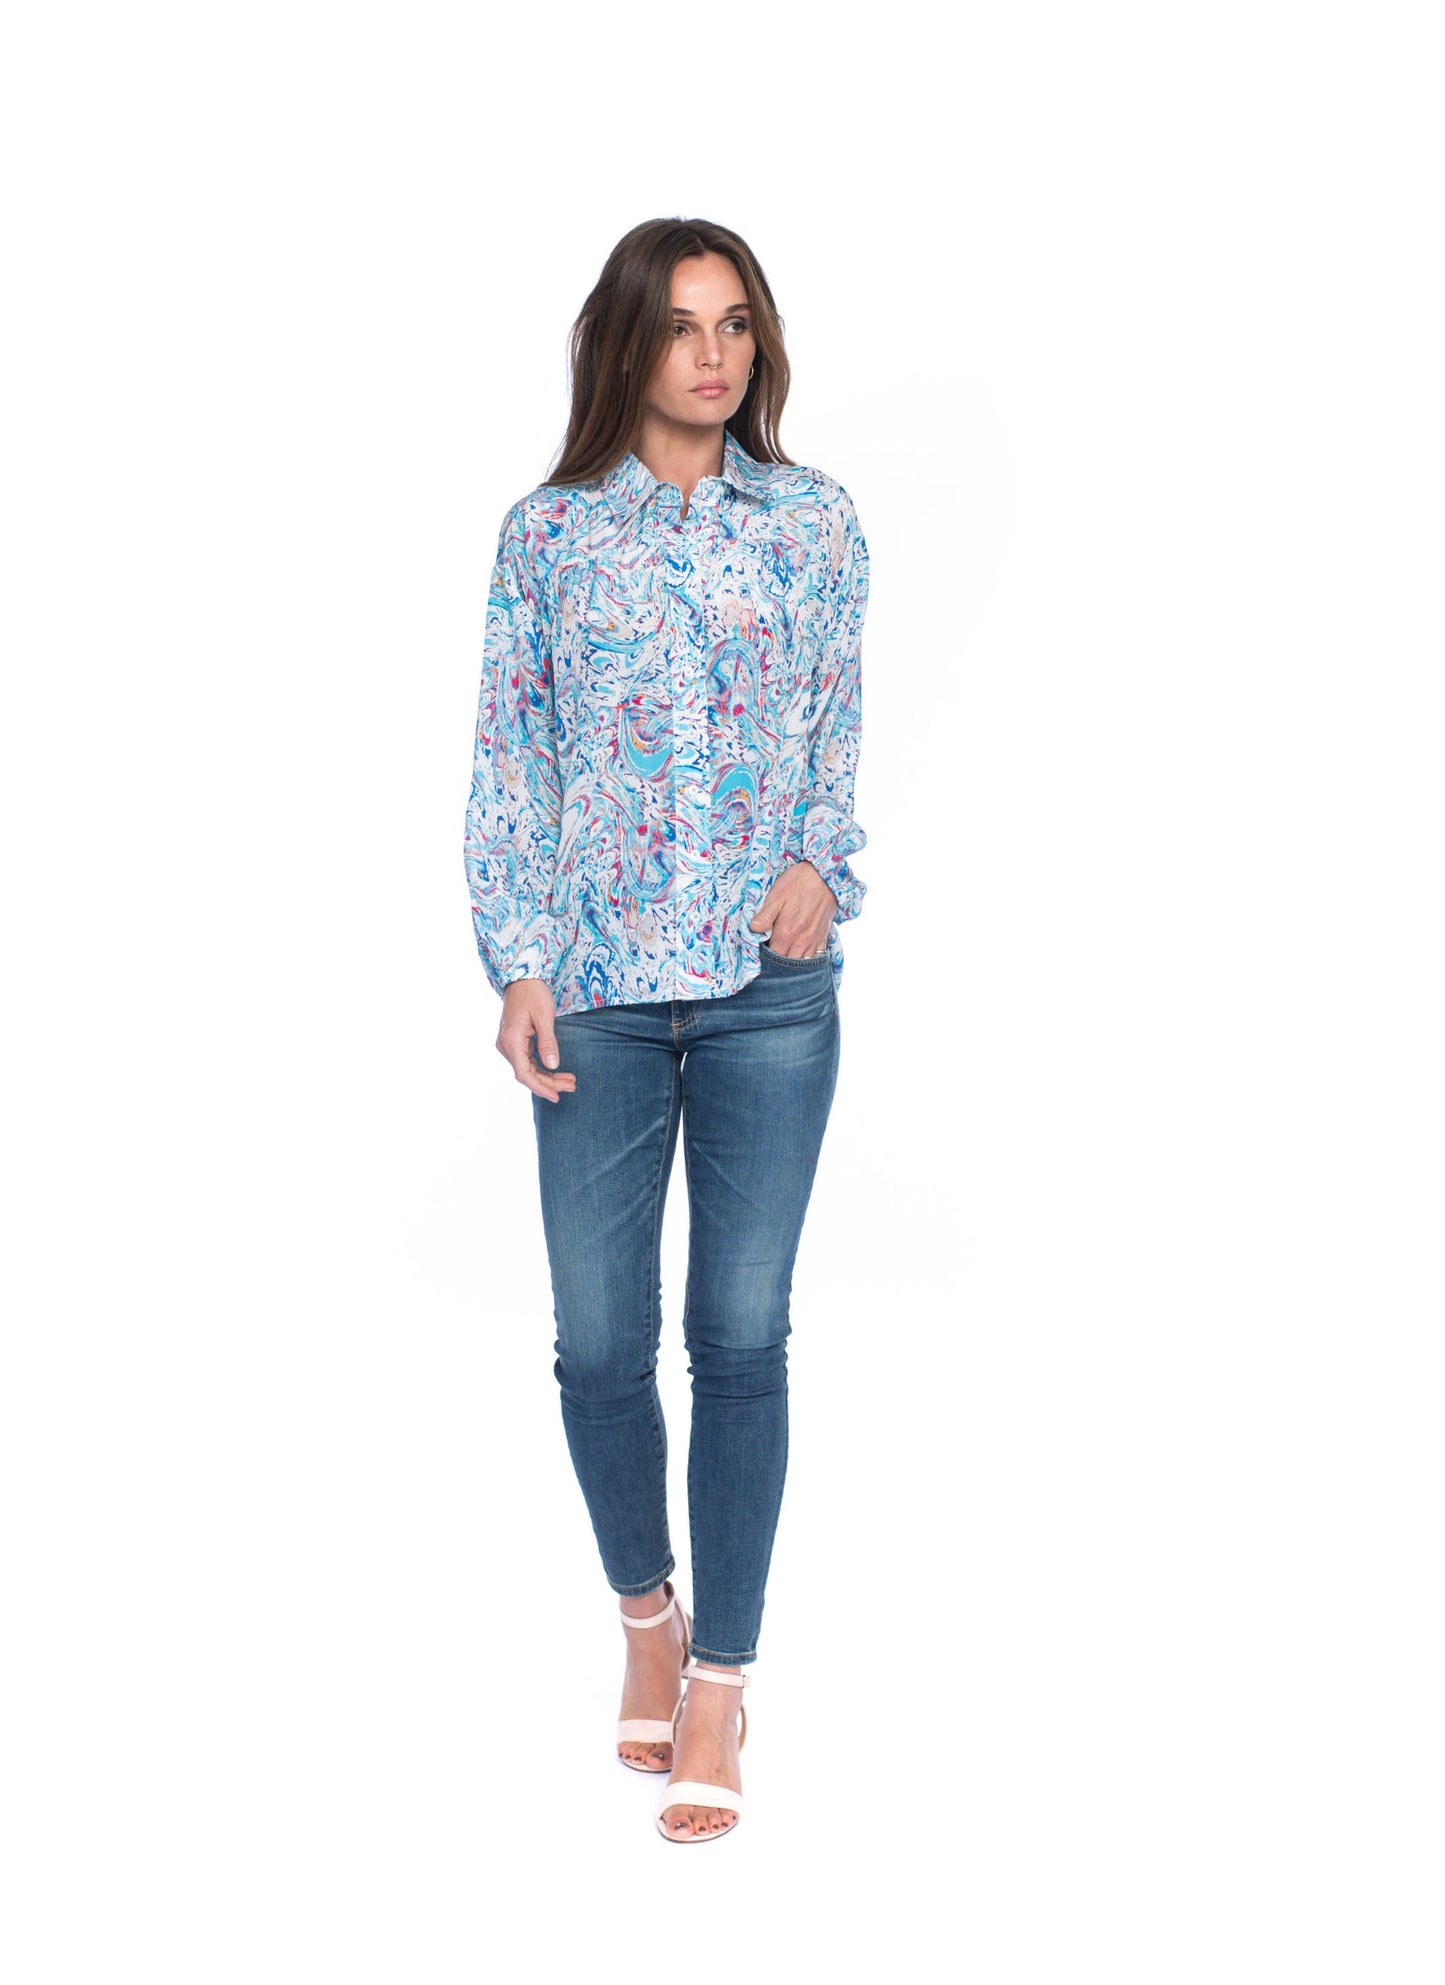 Quincy Wisteria Long Sleeve Blouse - Tolani